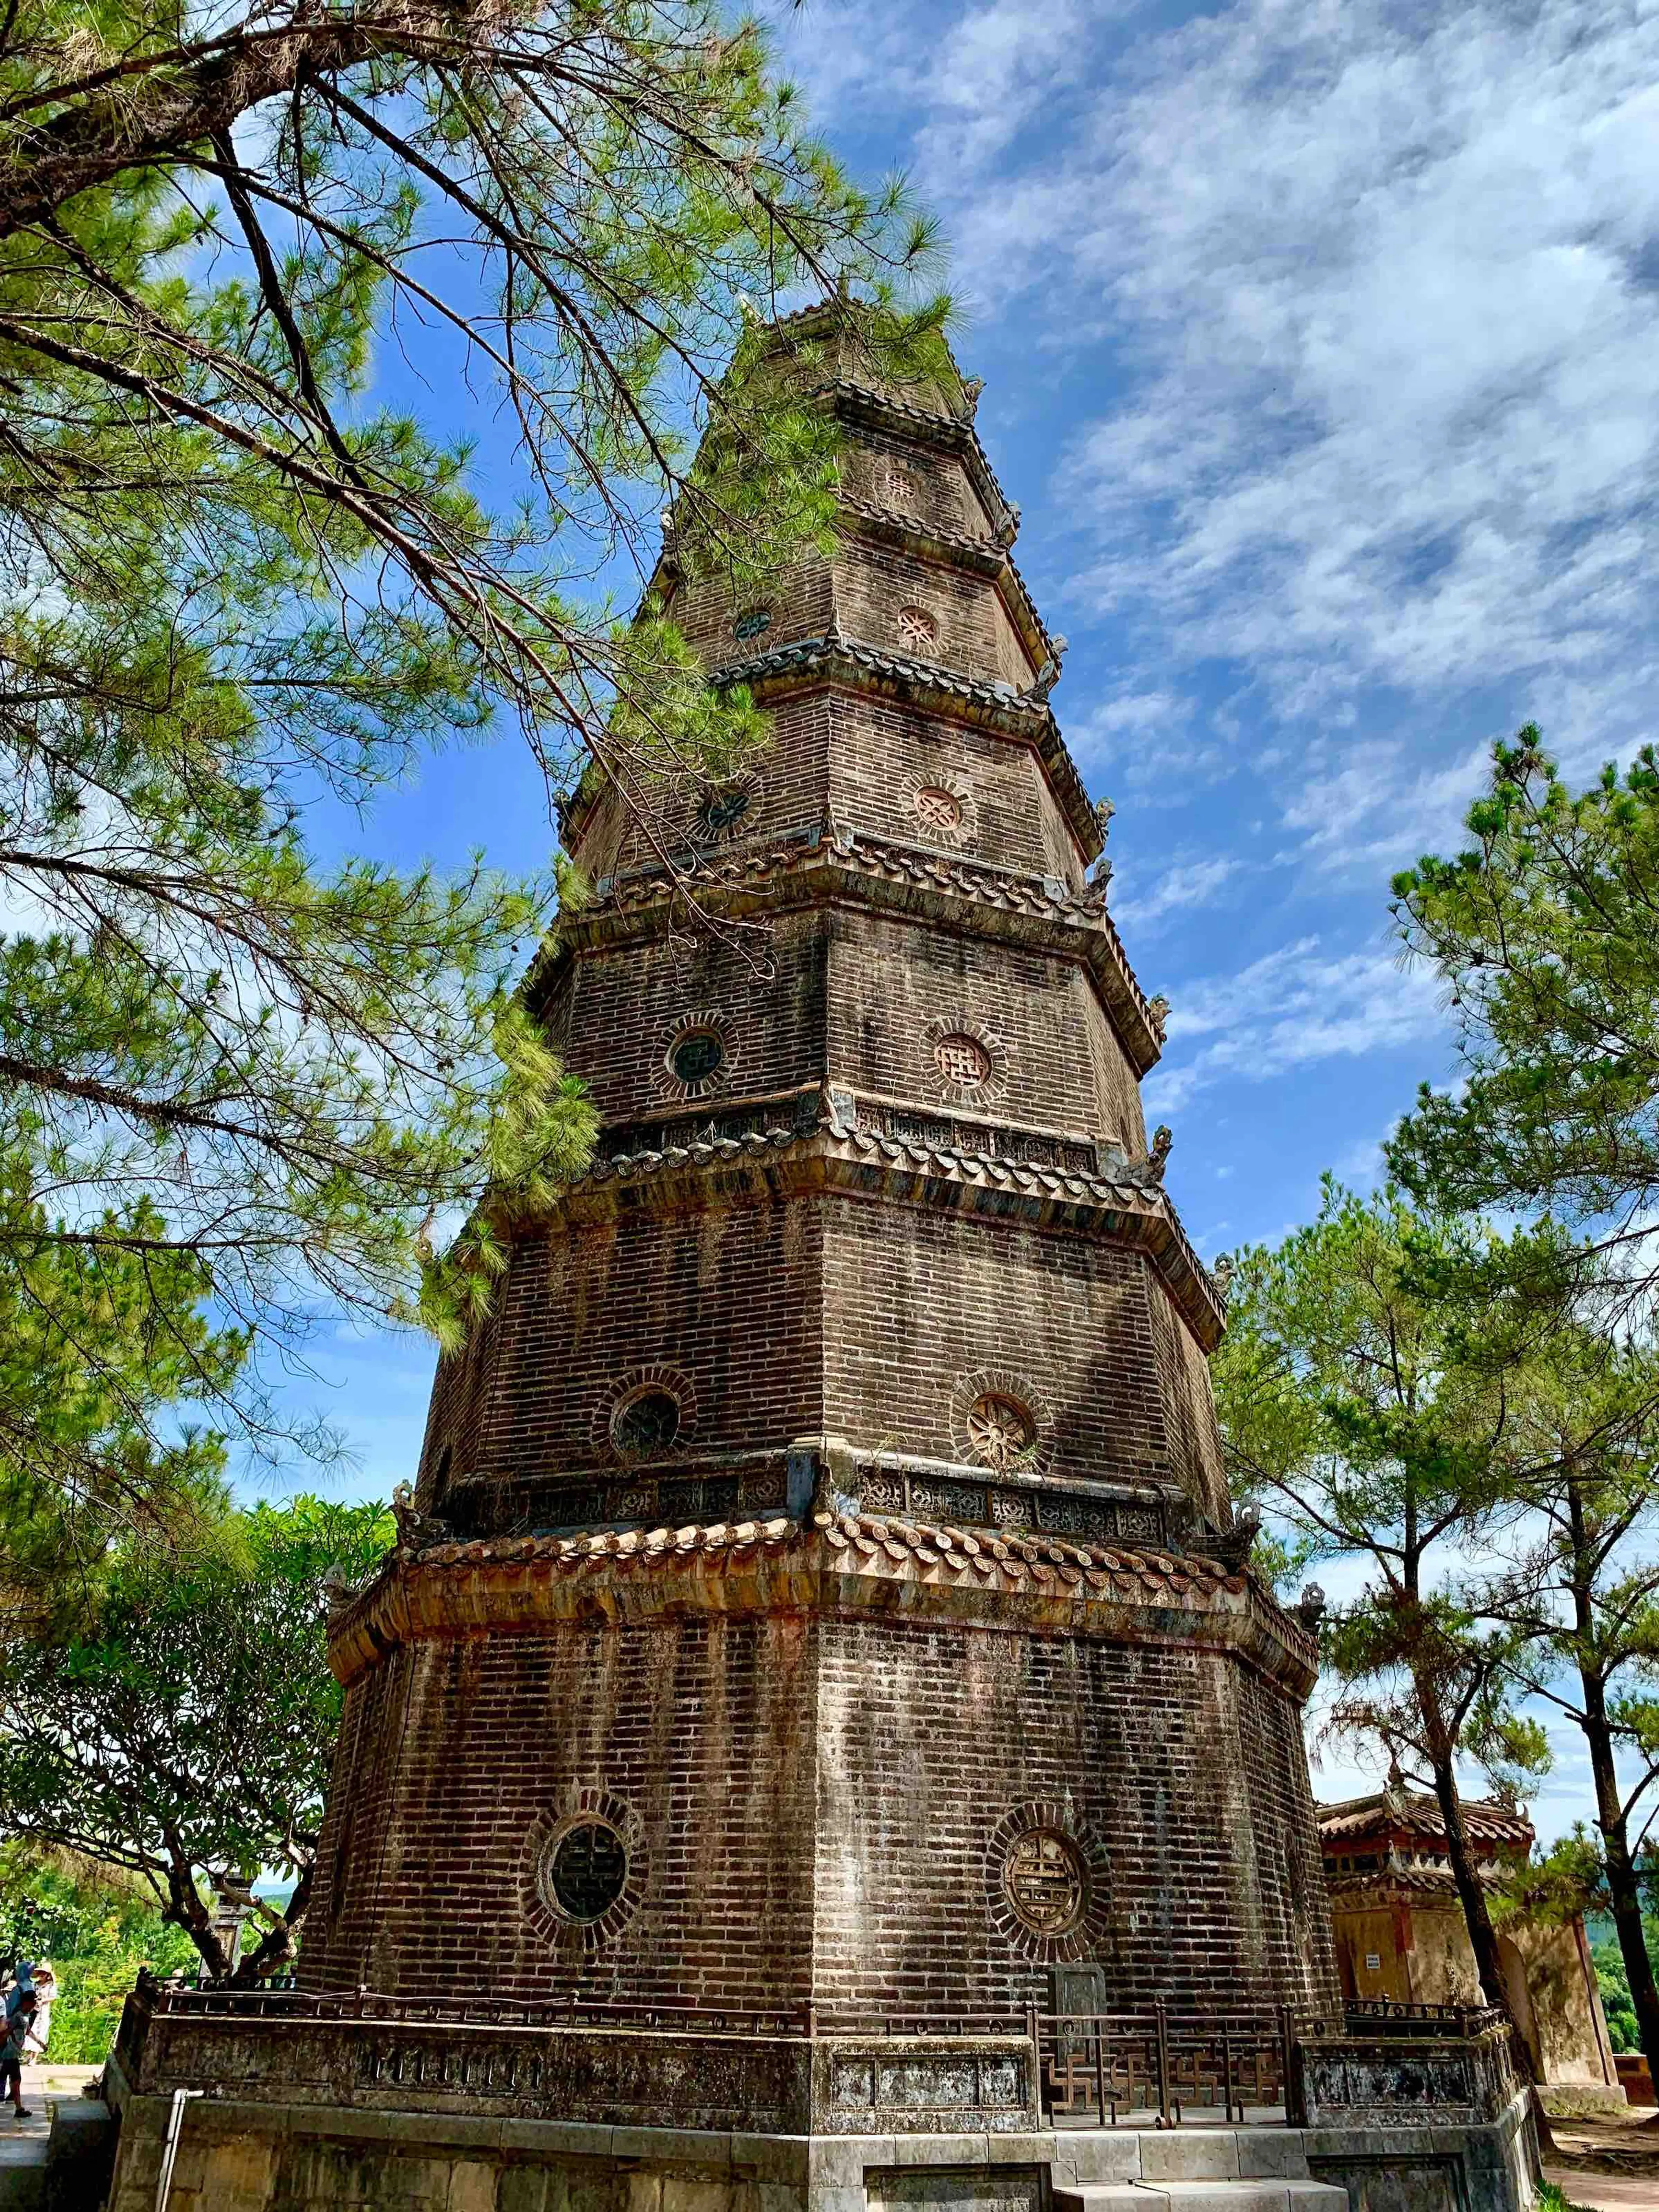 Thien Mu pagoda - where your stop at Hue Citadel on our trip